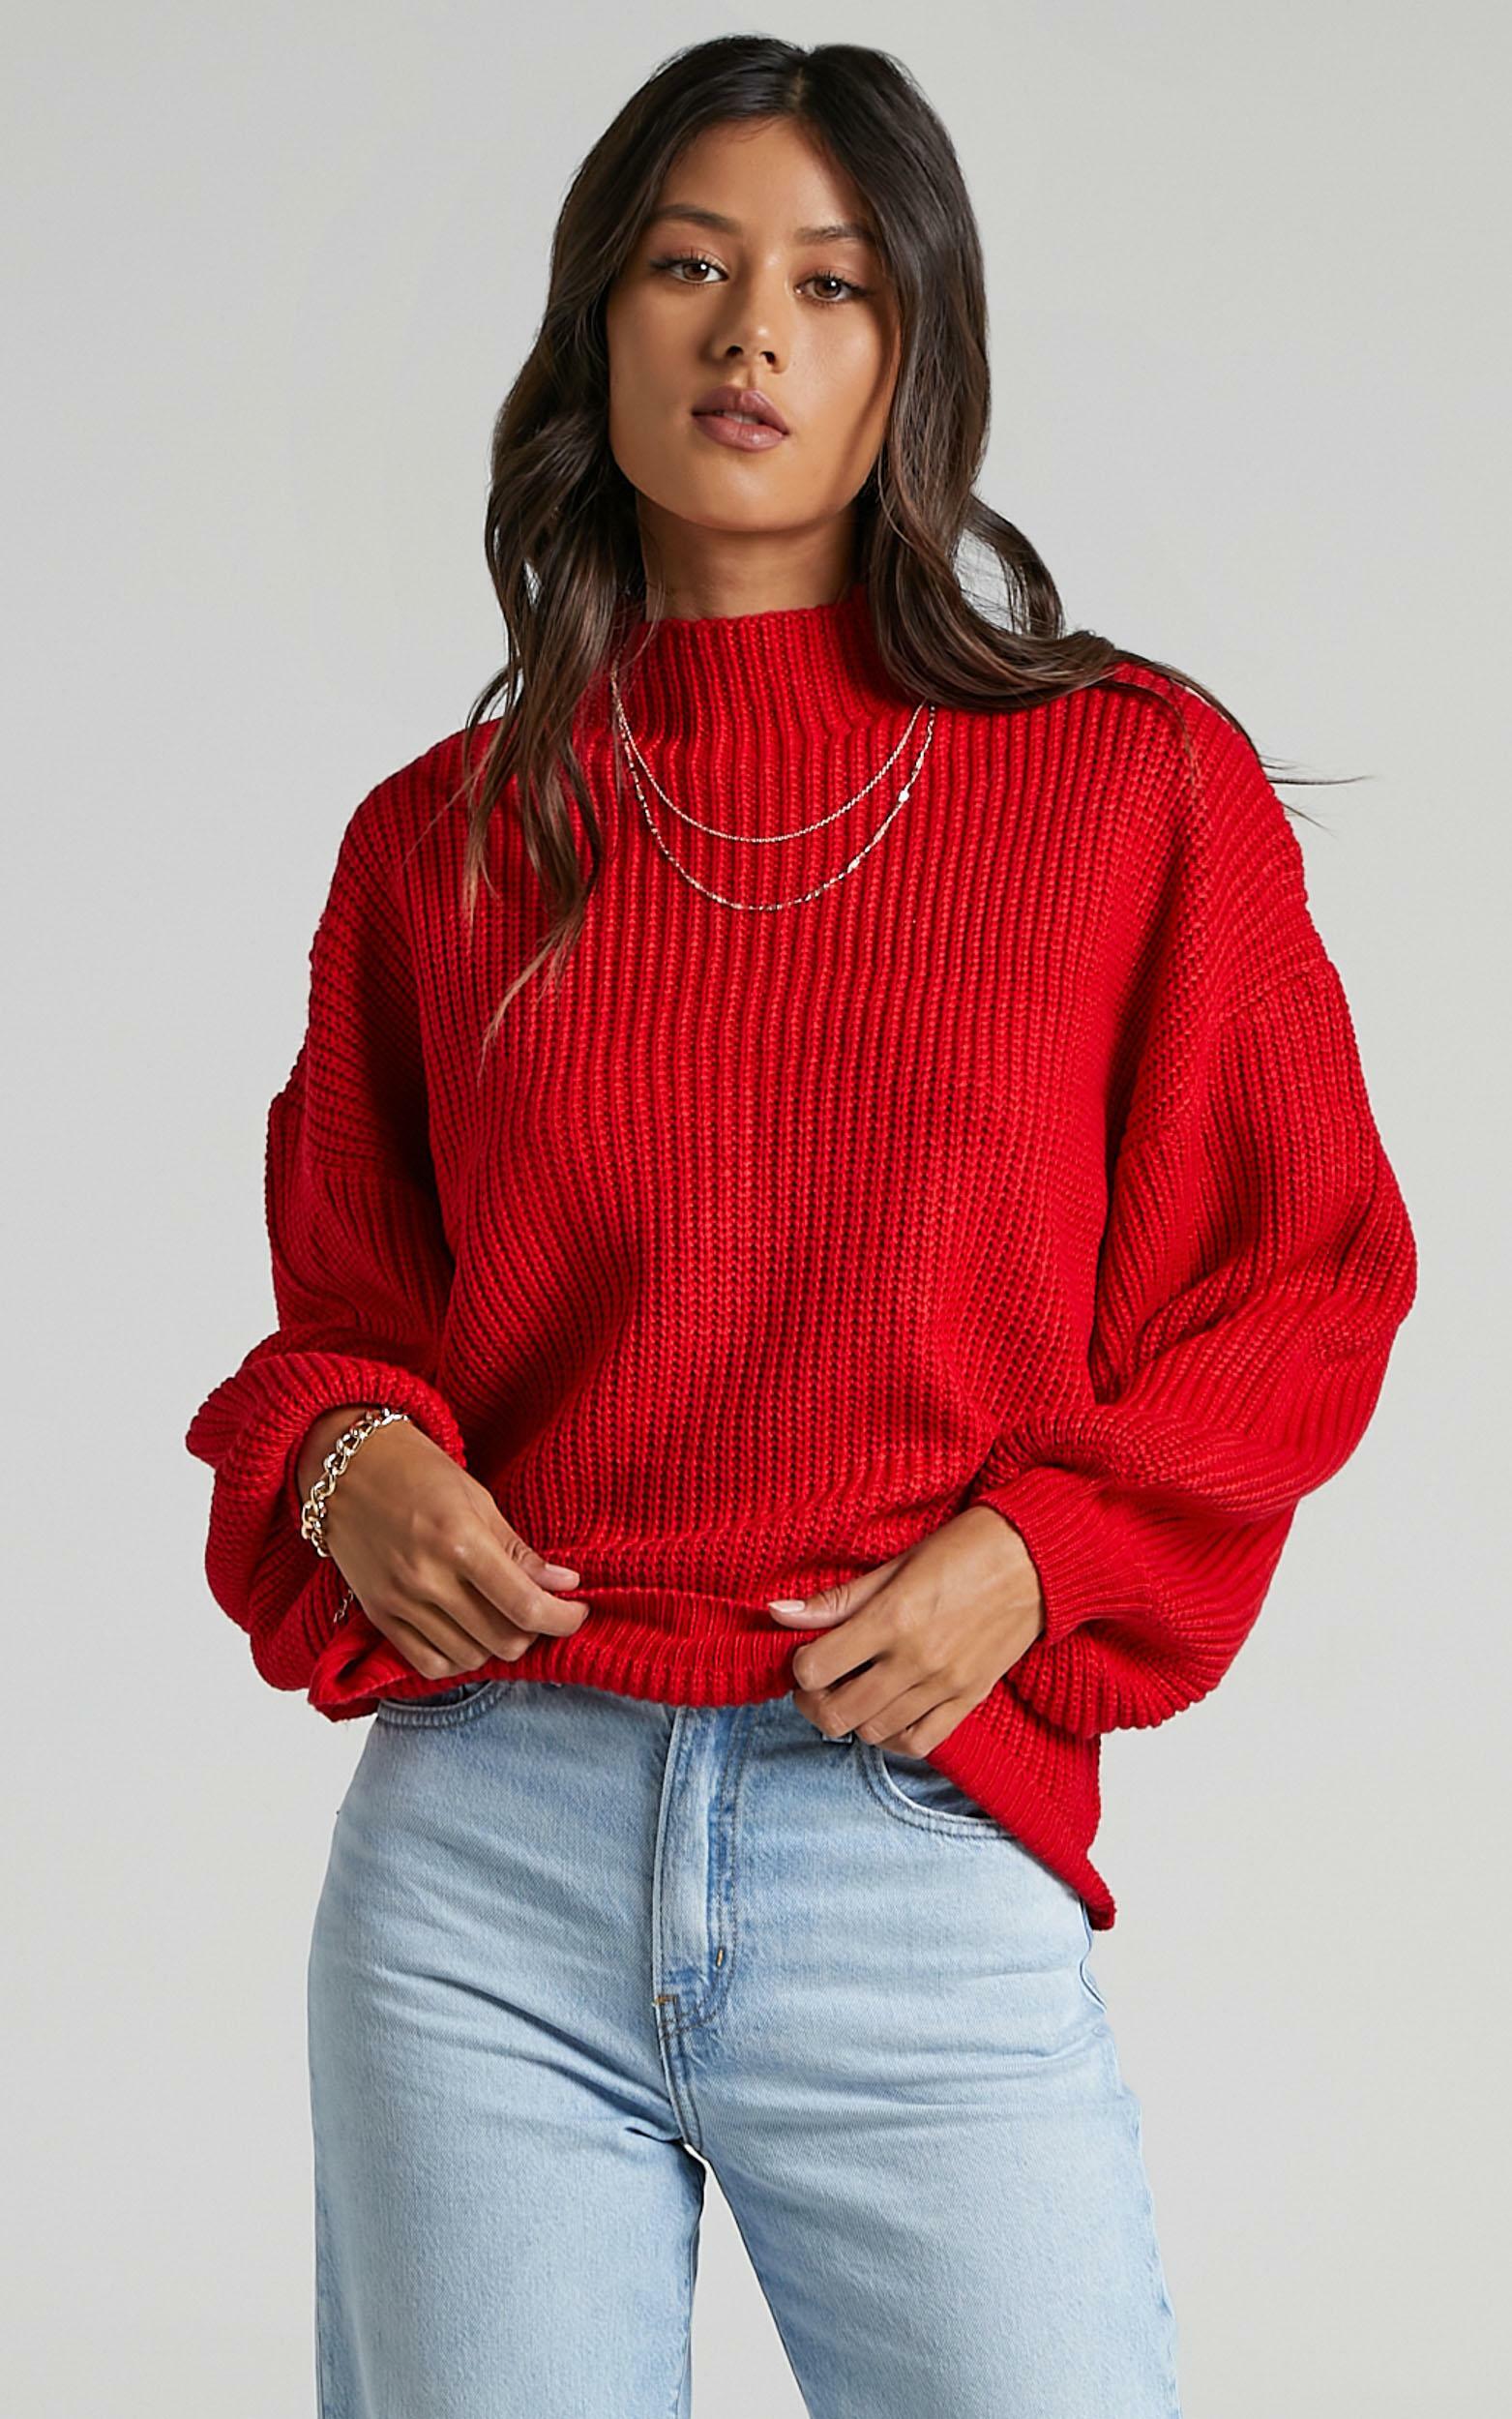 I Feel Love Oversized Knit Jumper in Red - 08, RED3, hi-res image number null